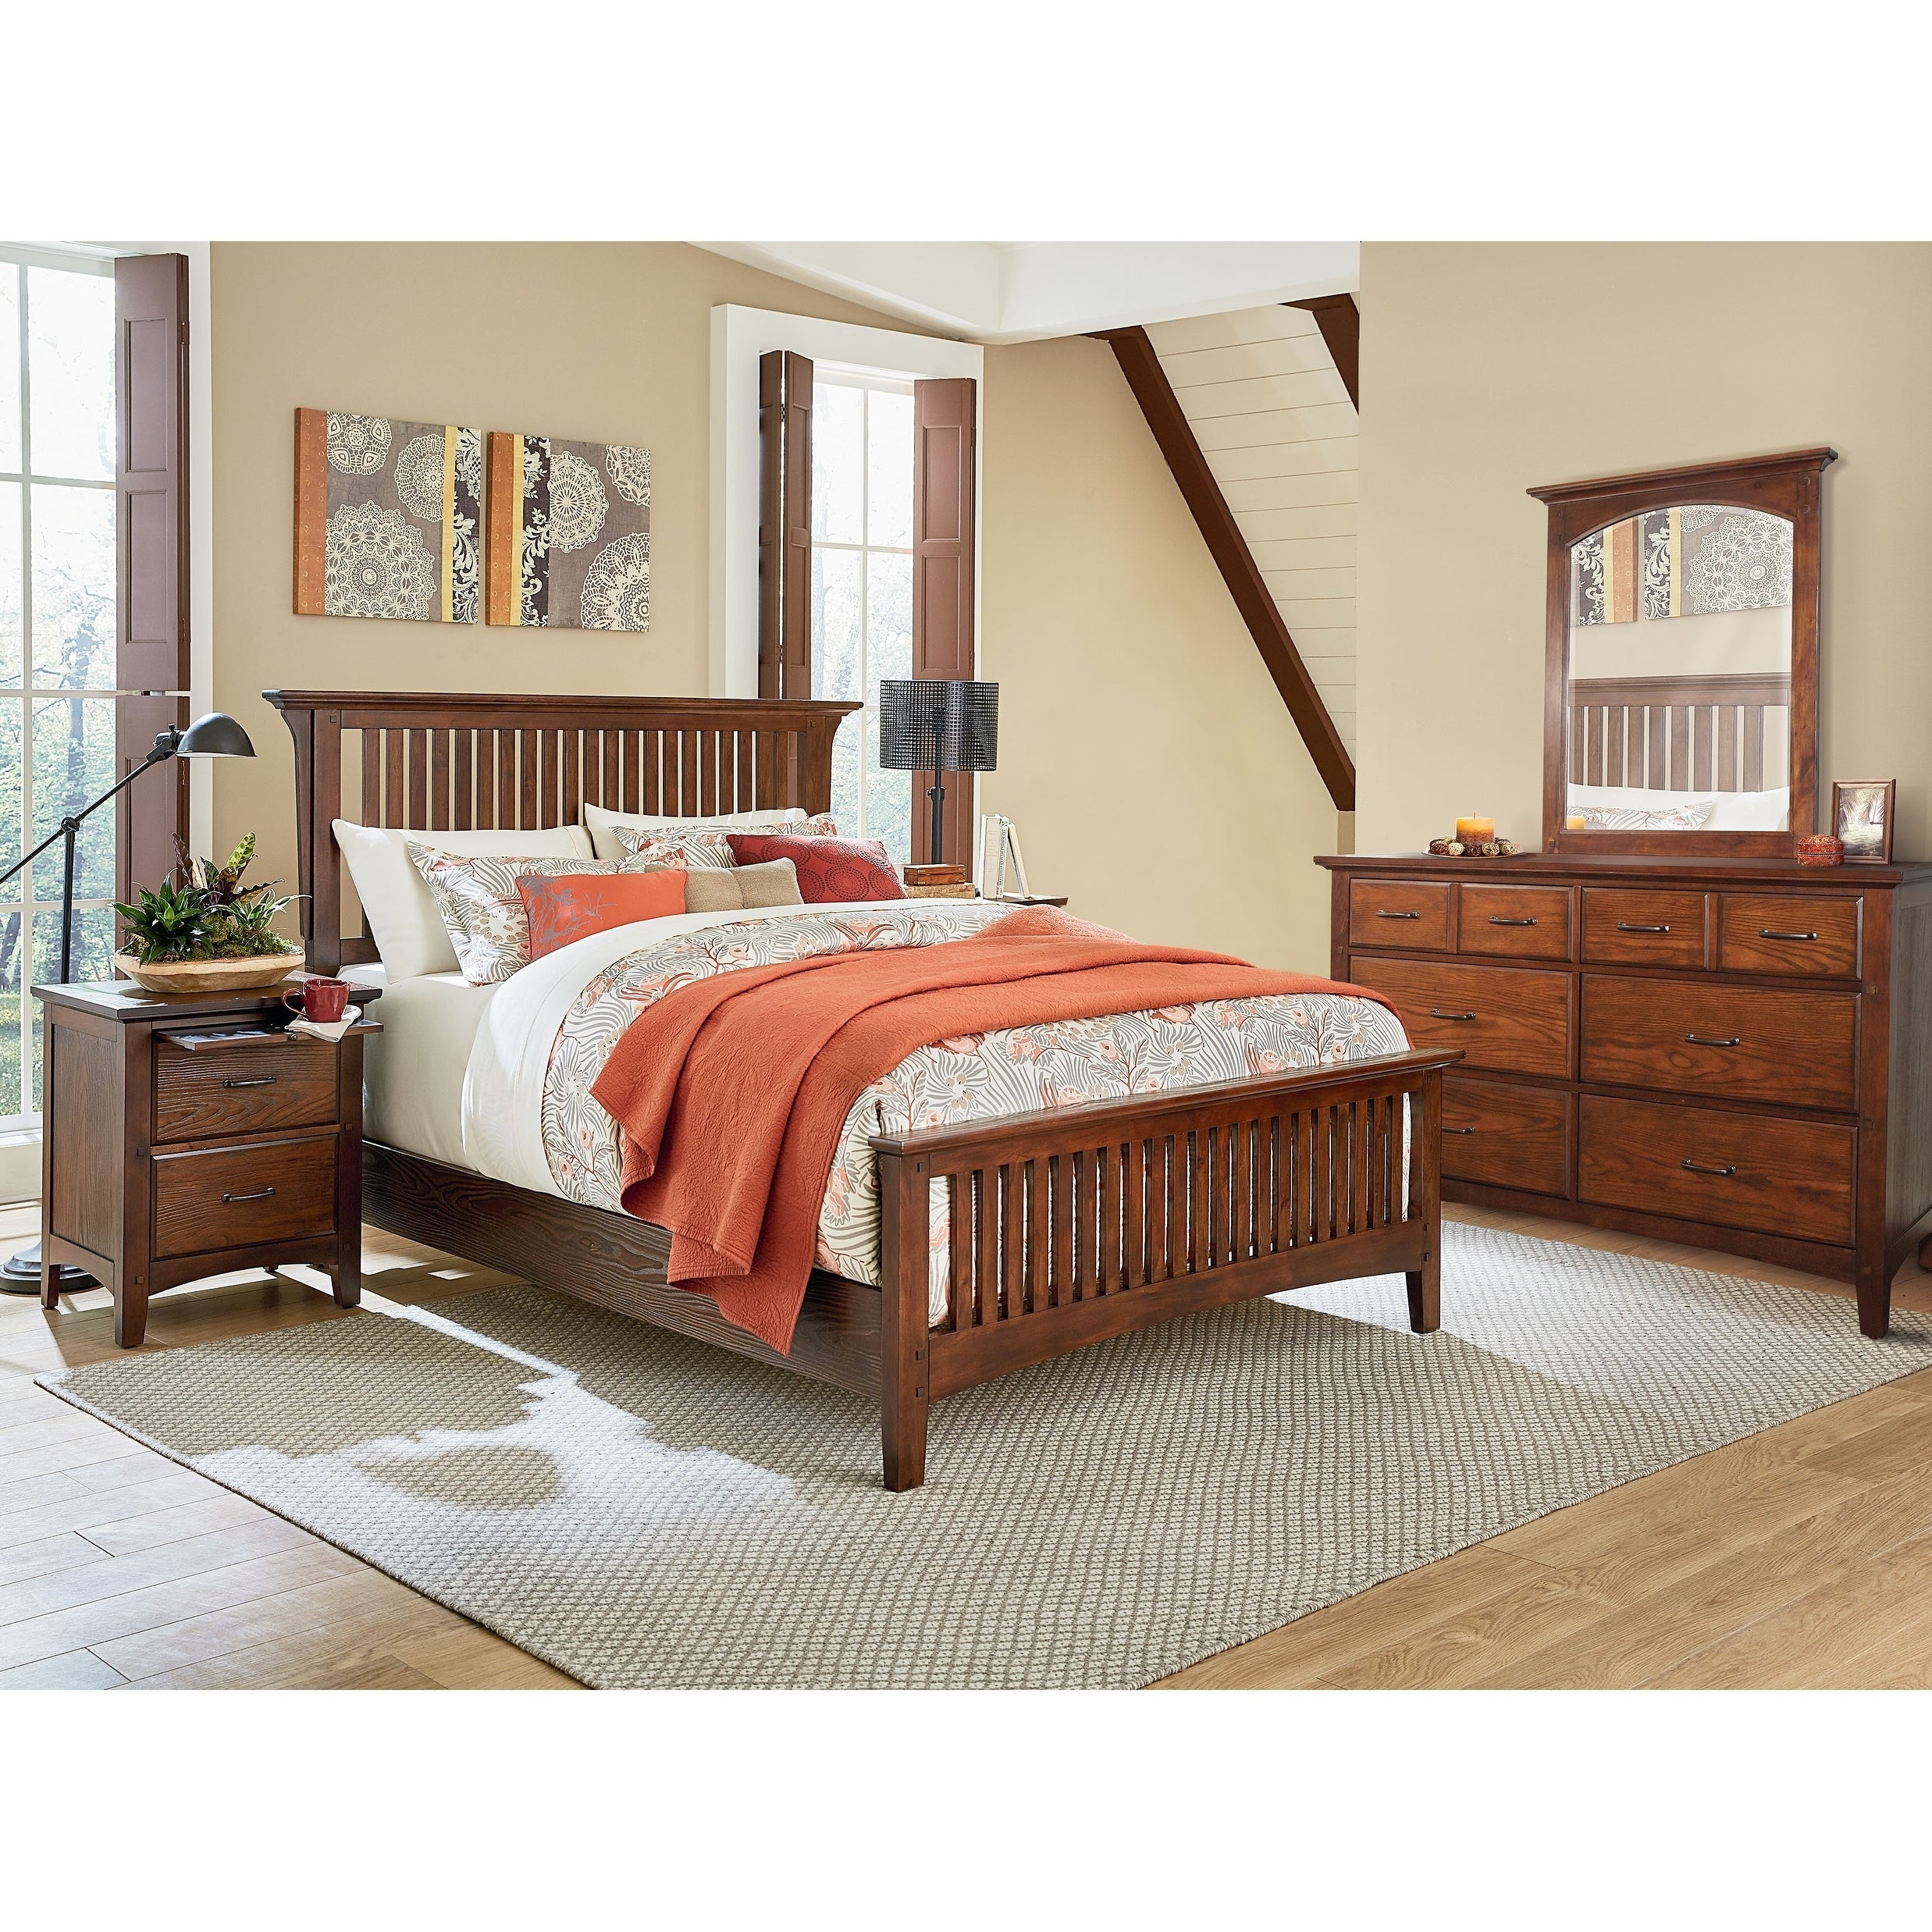 Osp Home Furnishings Modern Mission King Bedroom Set With 2 Nightstands And 1 Dresser With Mirror throughout size 2475 X 2475